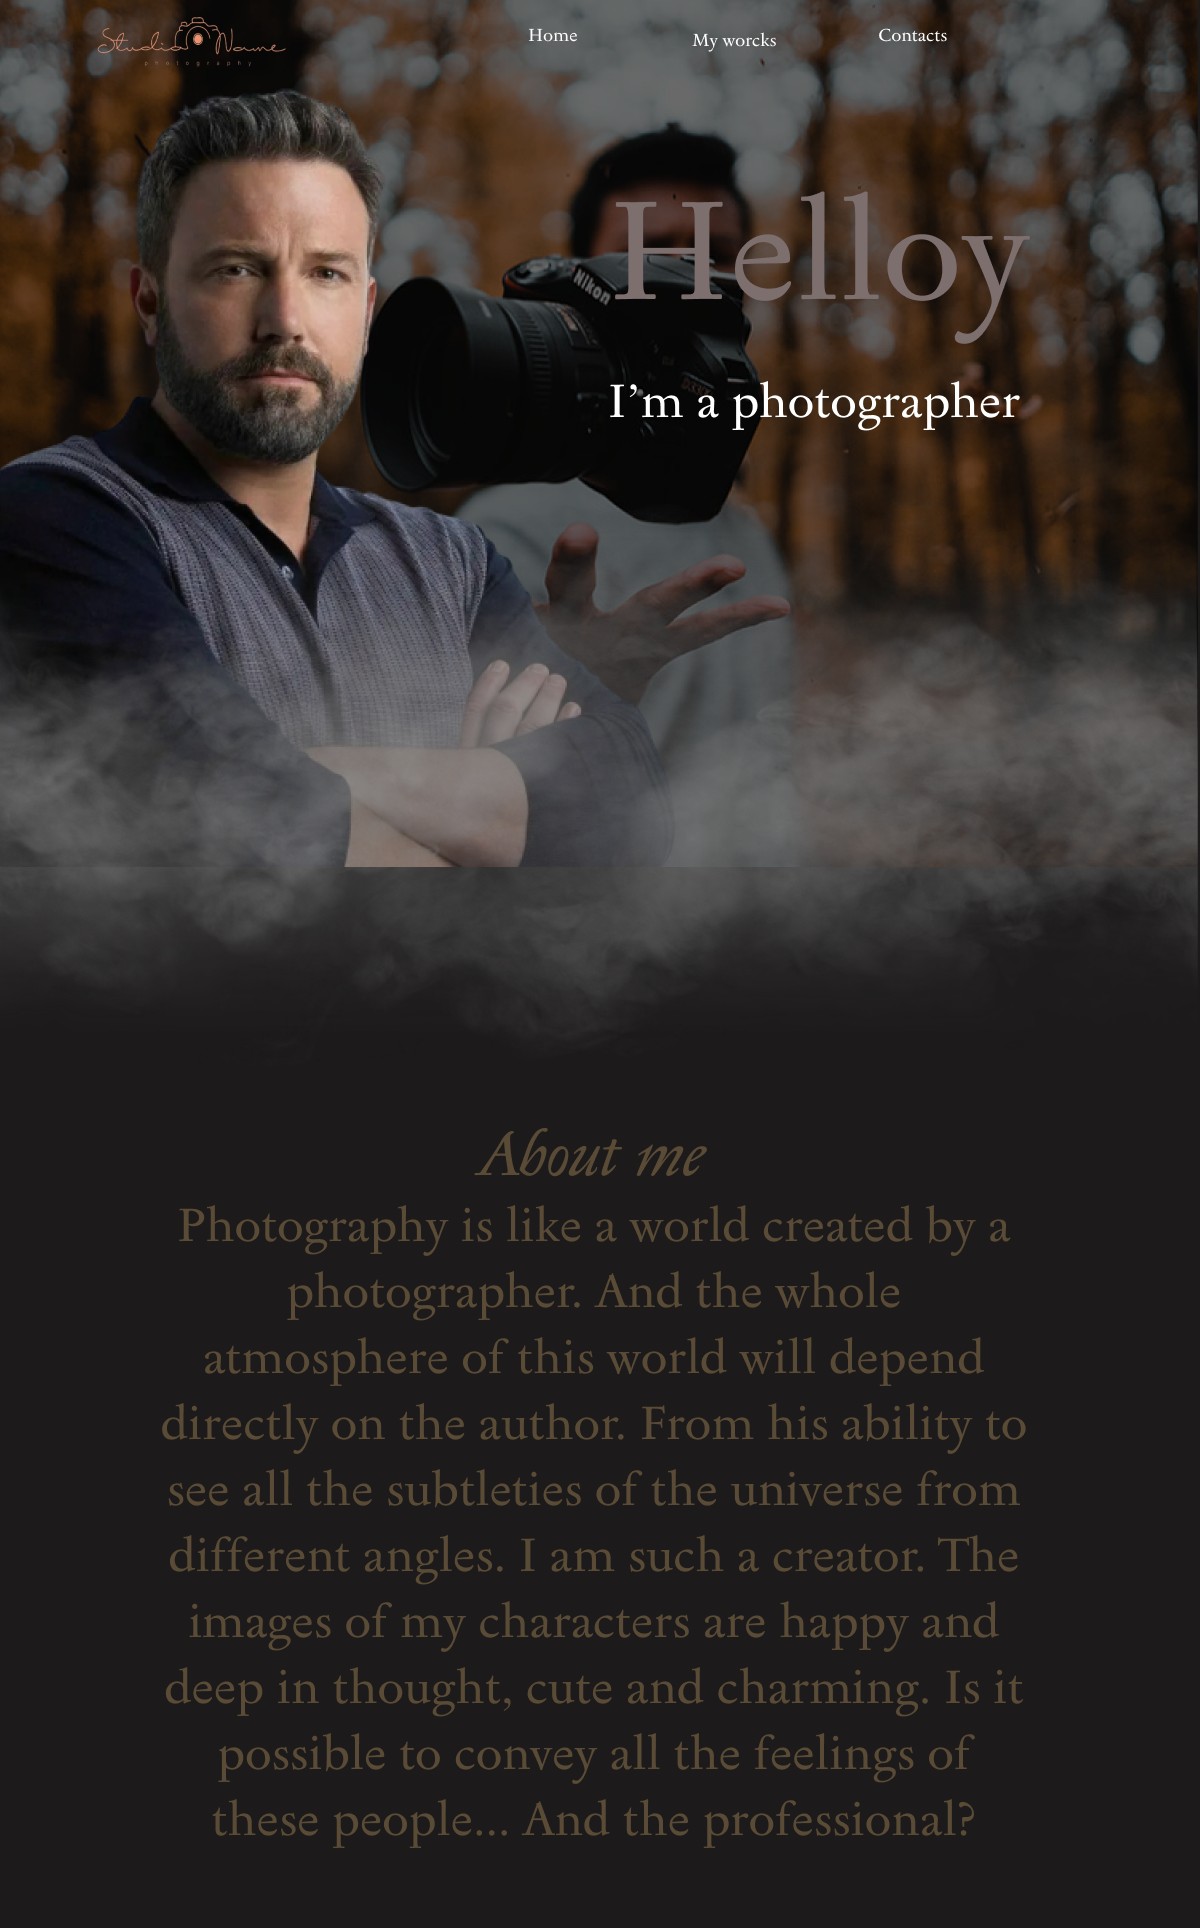 Website-the photographer's business card